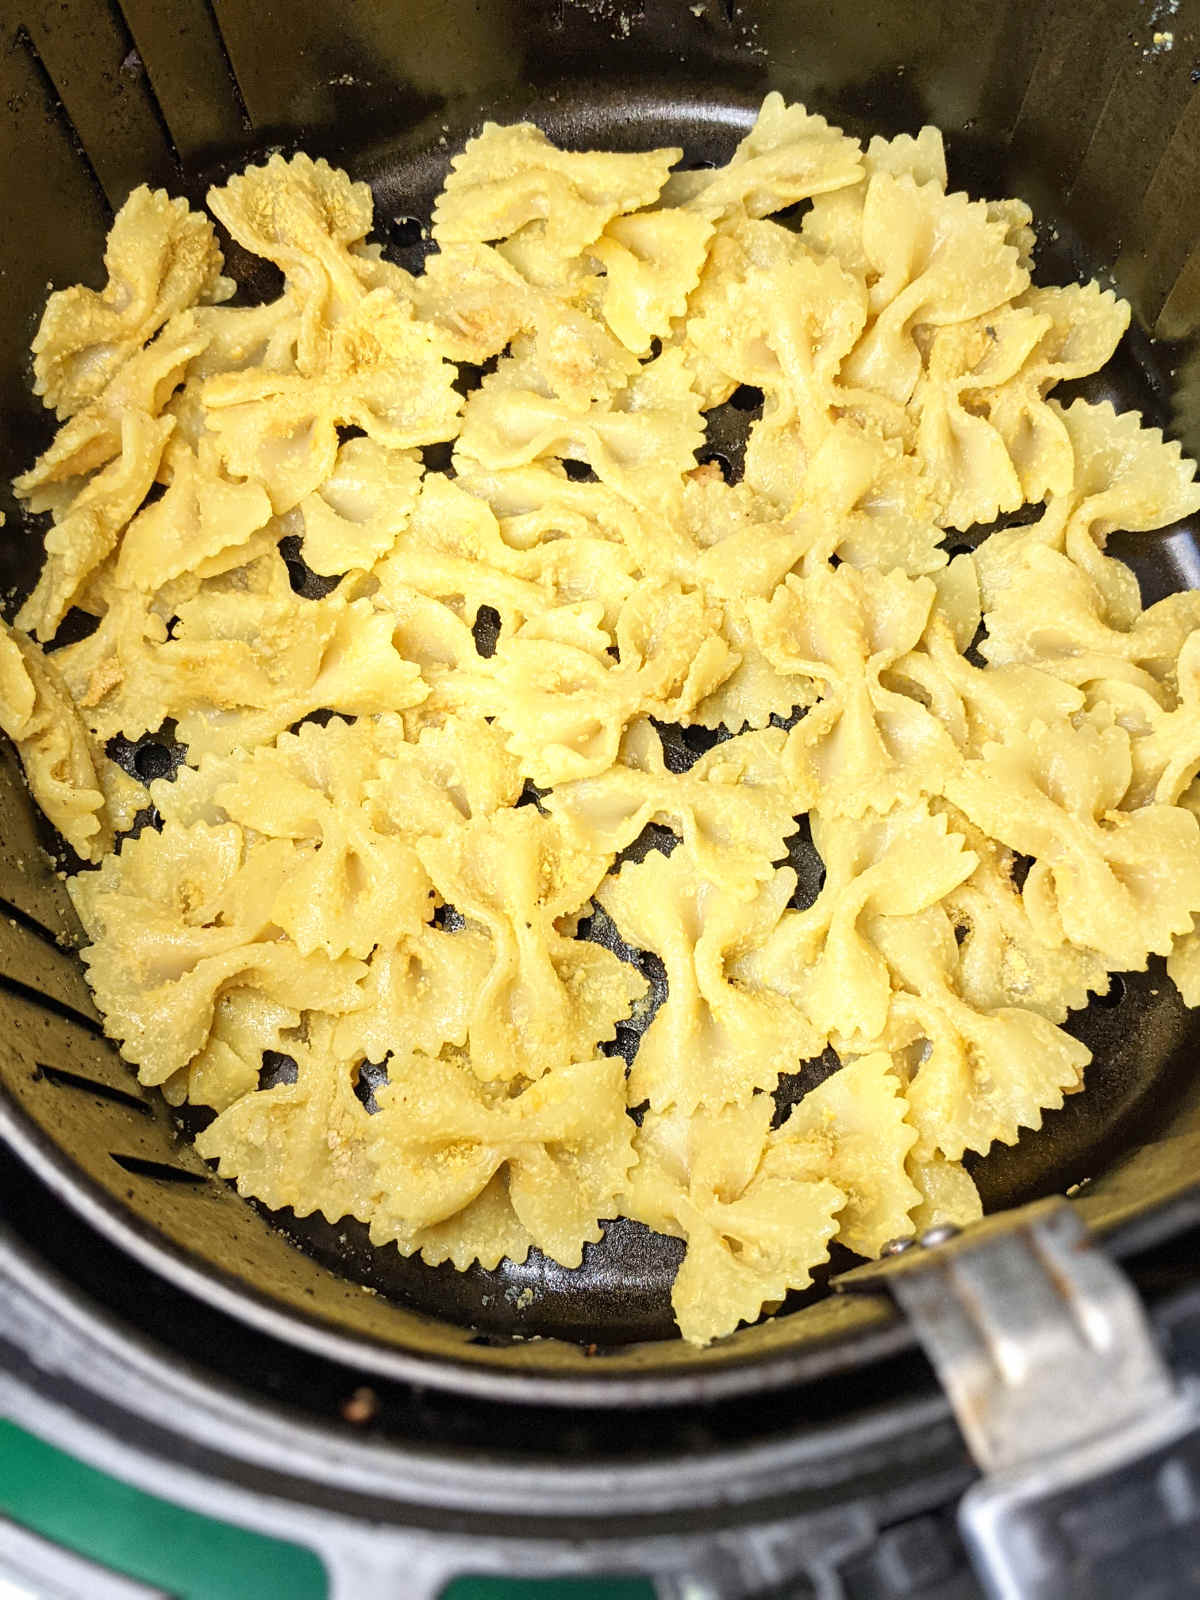 Pasta chips spread out in air fryer before cooking.